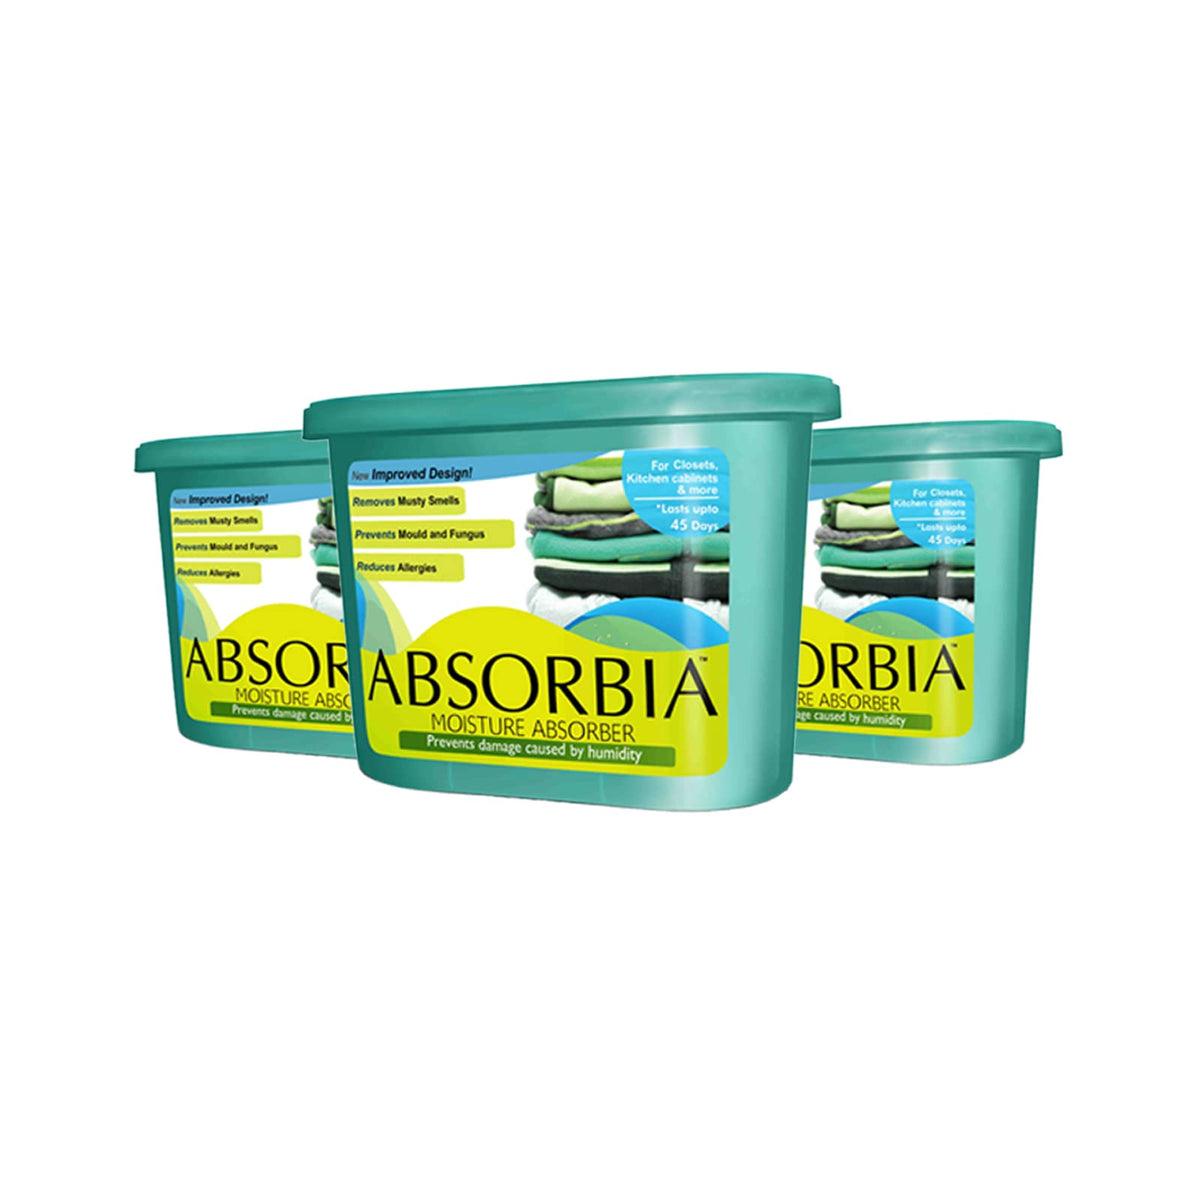 Absorbia Moisture Absorber | Absorbia Classic (300 gms X 3 boxes)- Family Pack of 3 | Absorption Capacity 600ml Each|Dehumidier for Wardrobe etc| Fights Against Moisture, Mould, Fungus & Musty smells